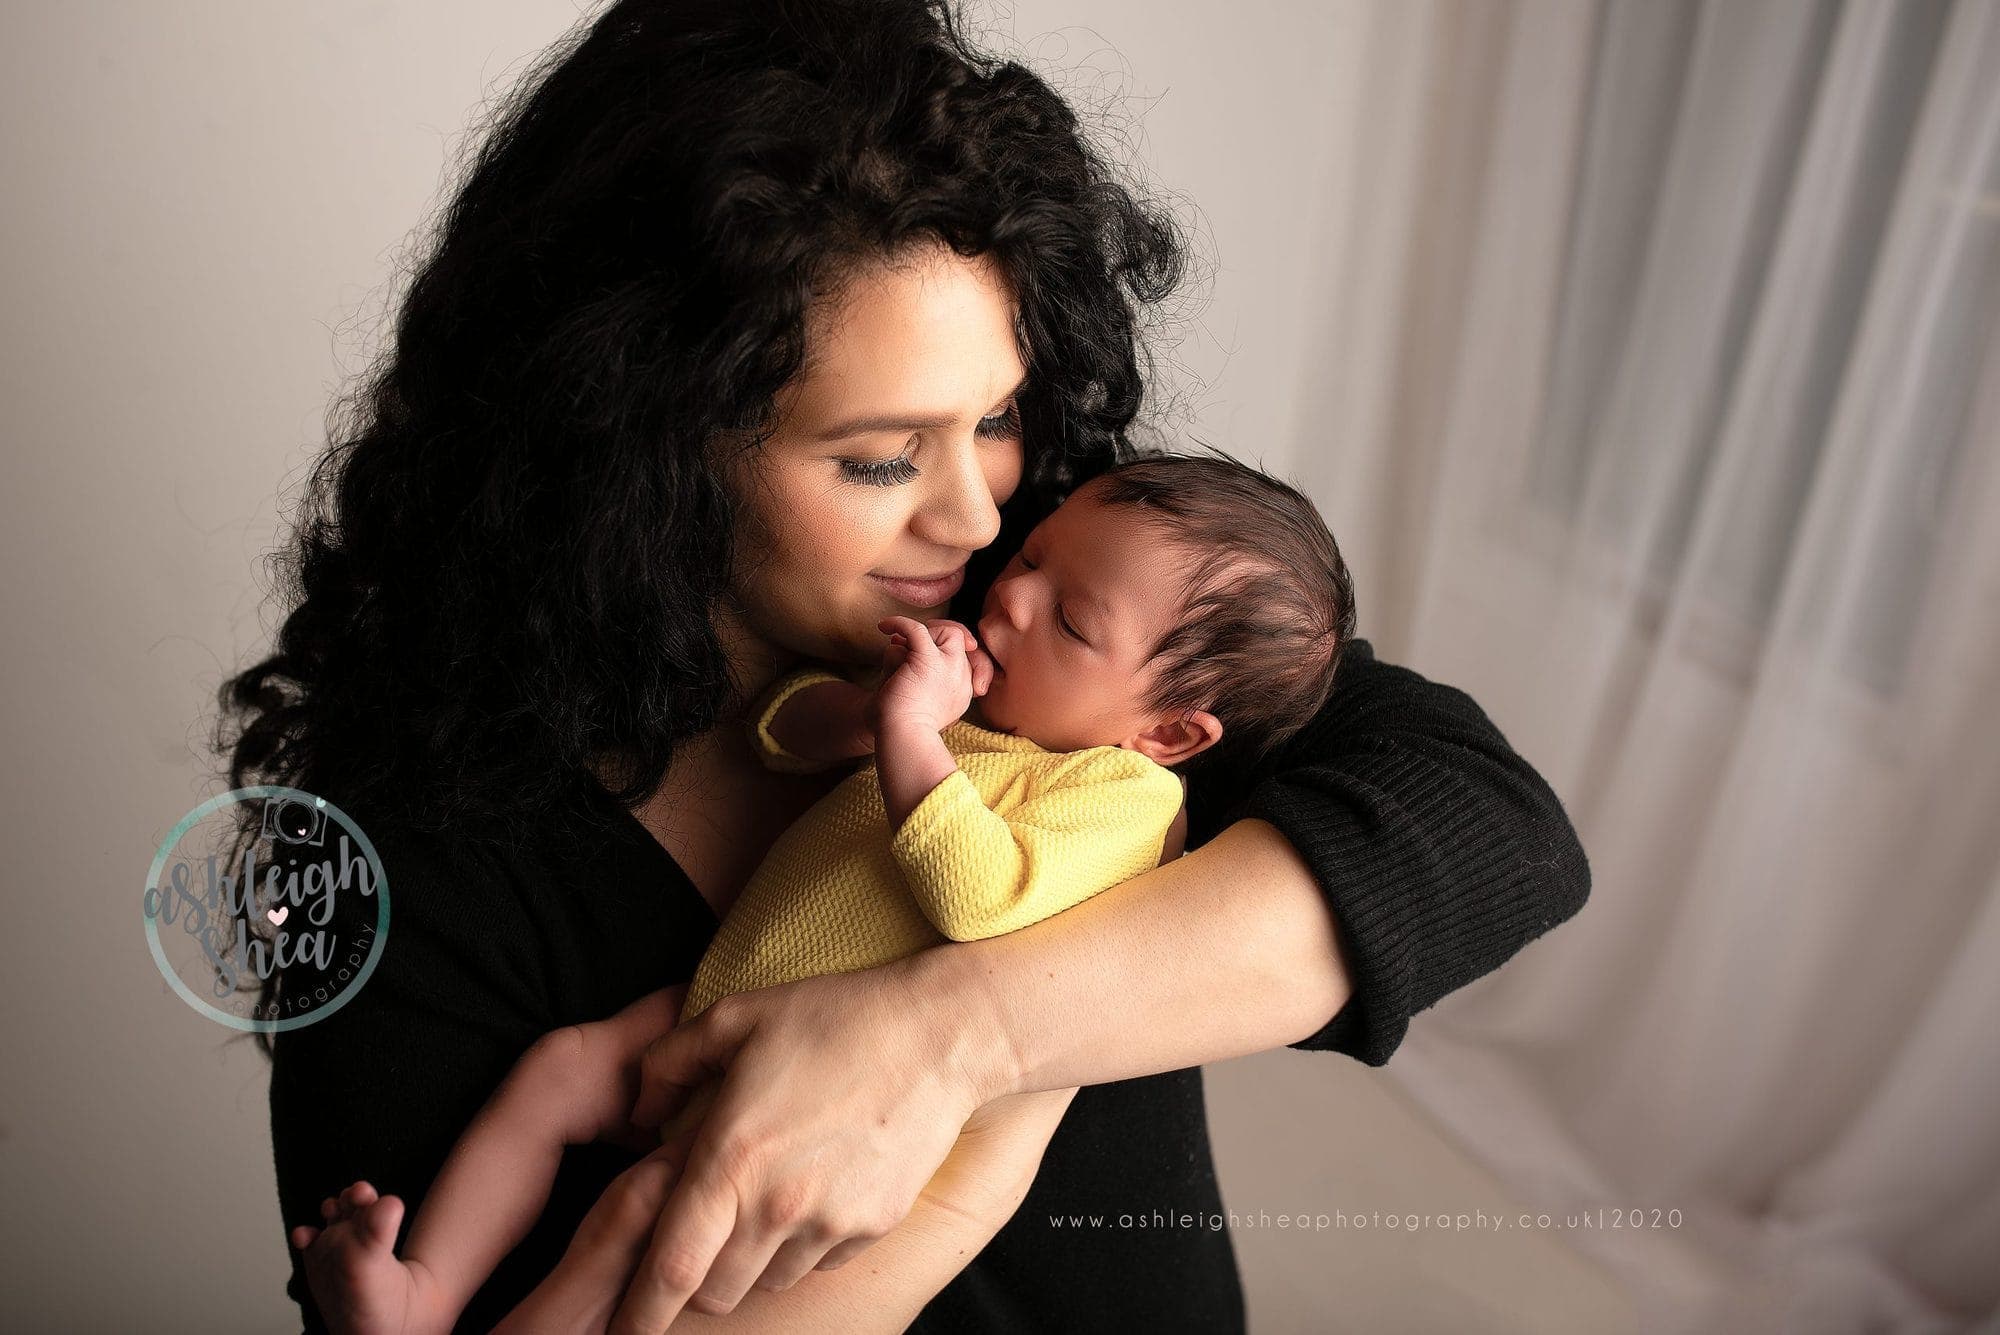 Mum and Daughter, Mother and Baby, Baby Girl, Newborn Session, Ashleigh Shea Photography, London Newborn Photographer